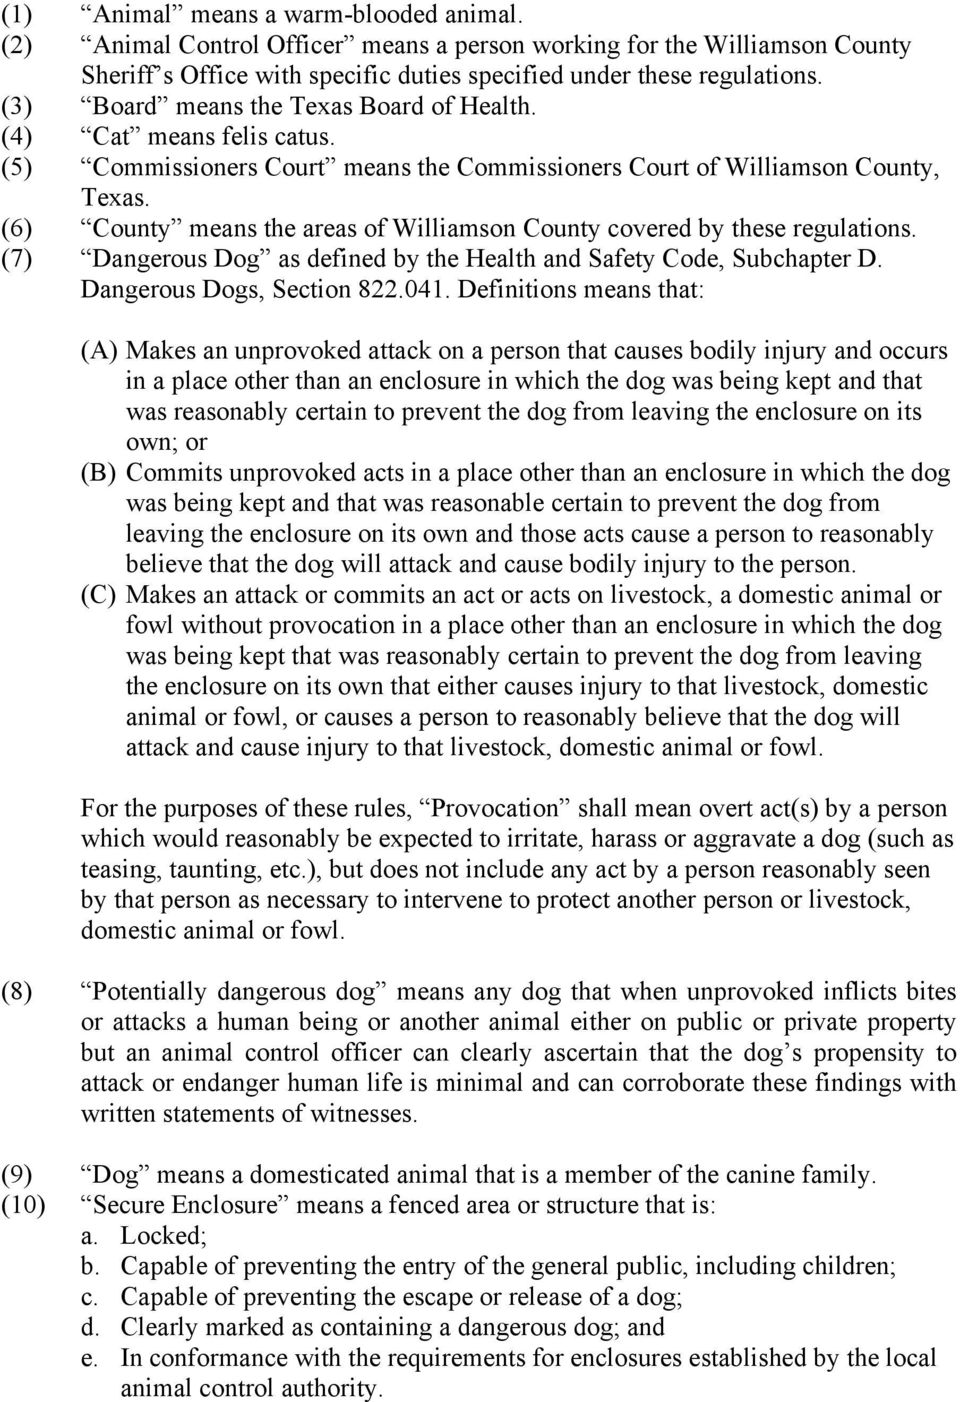 (6) County means the areas of Williamson County covered by these regulations. (7) Dangerous Dog as defined by the Health and Safety Code, Subchapter D. Dangerous Dogs, Section 822.041.